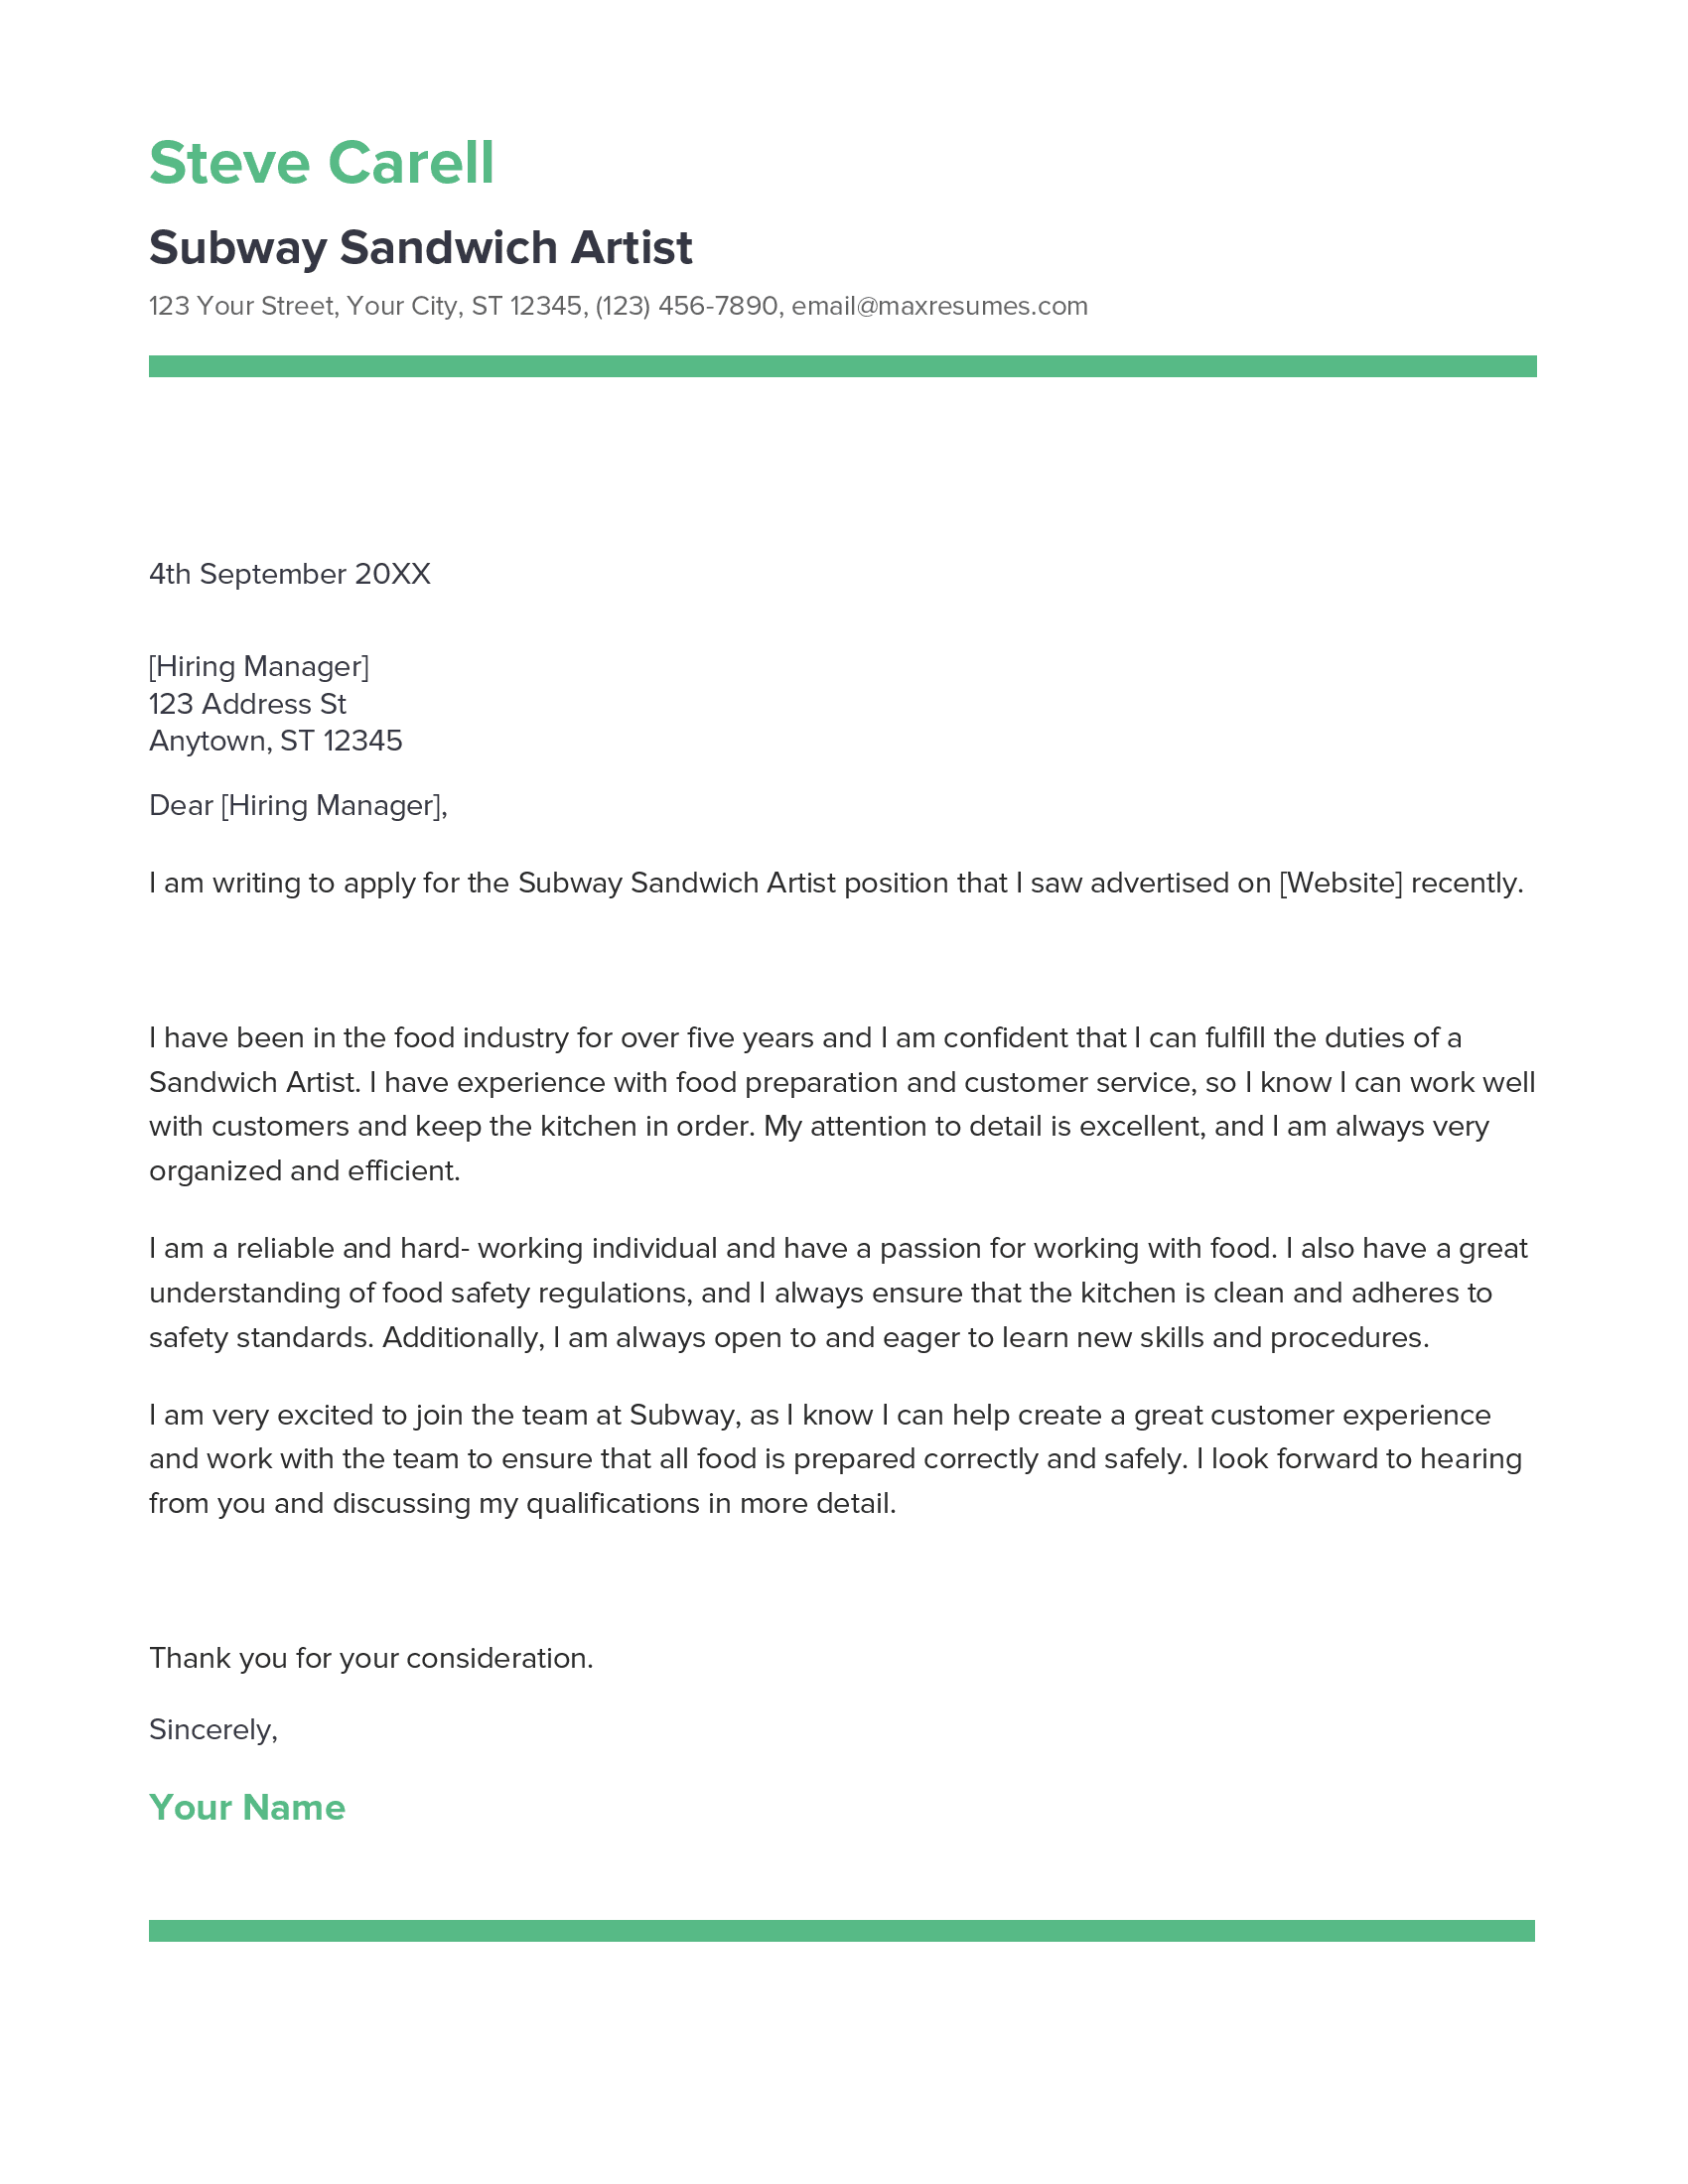 Subway Sandwich Artist Cover Letter Example